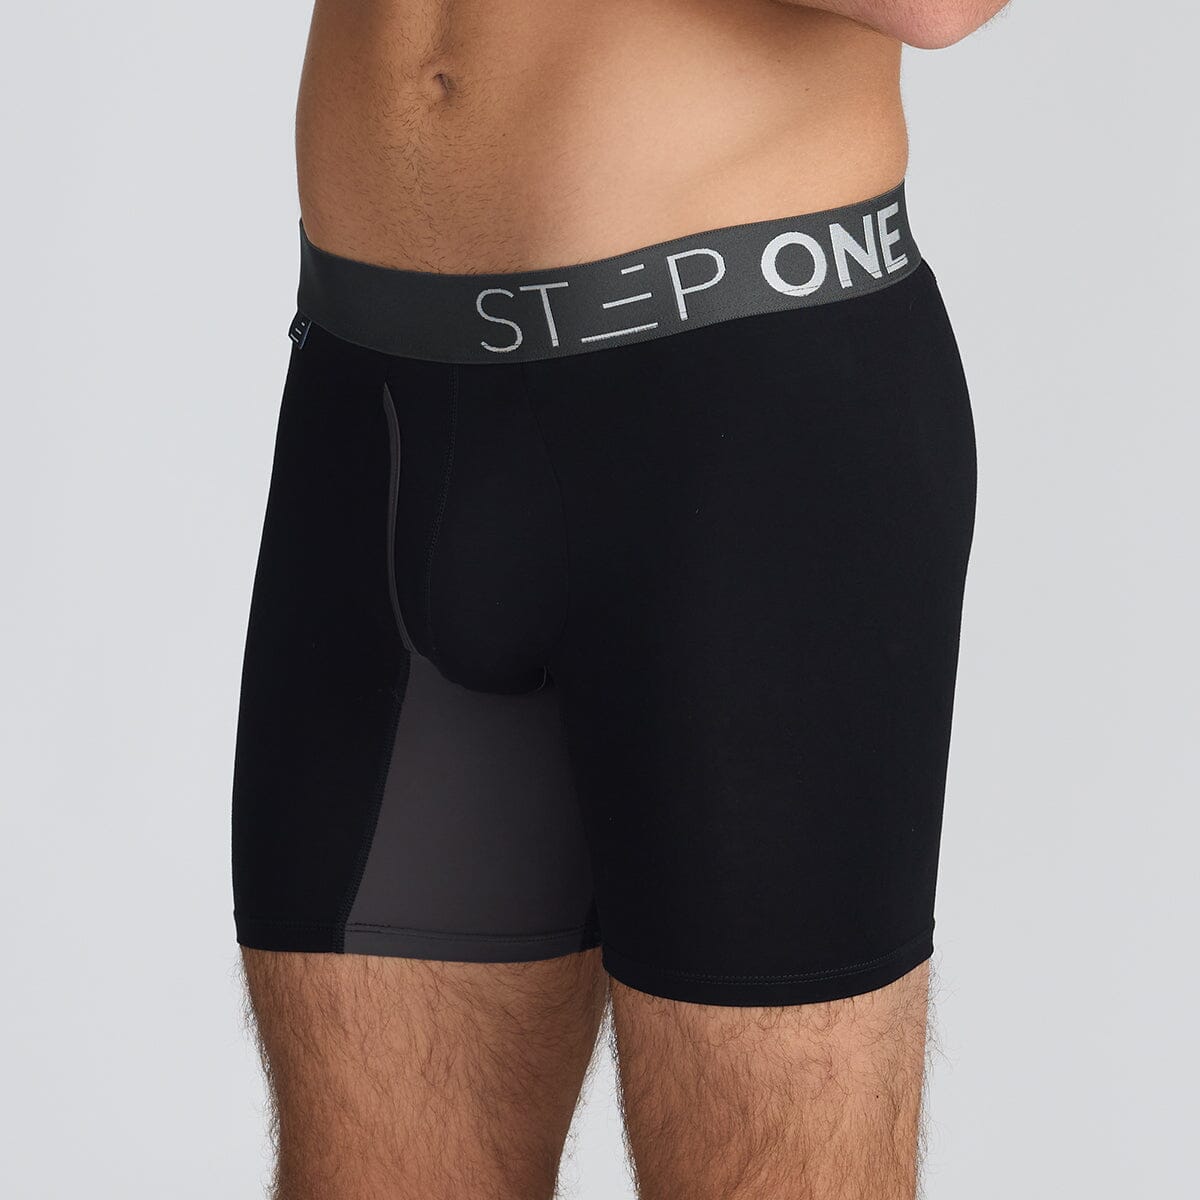 Black Underwear with Fly at Step One